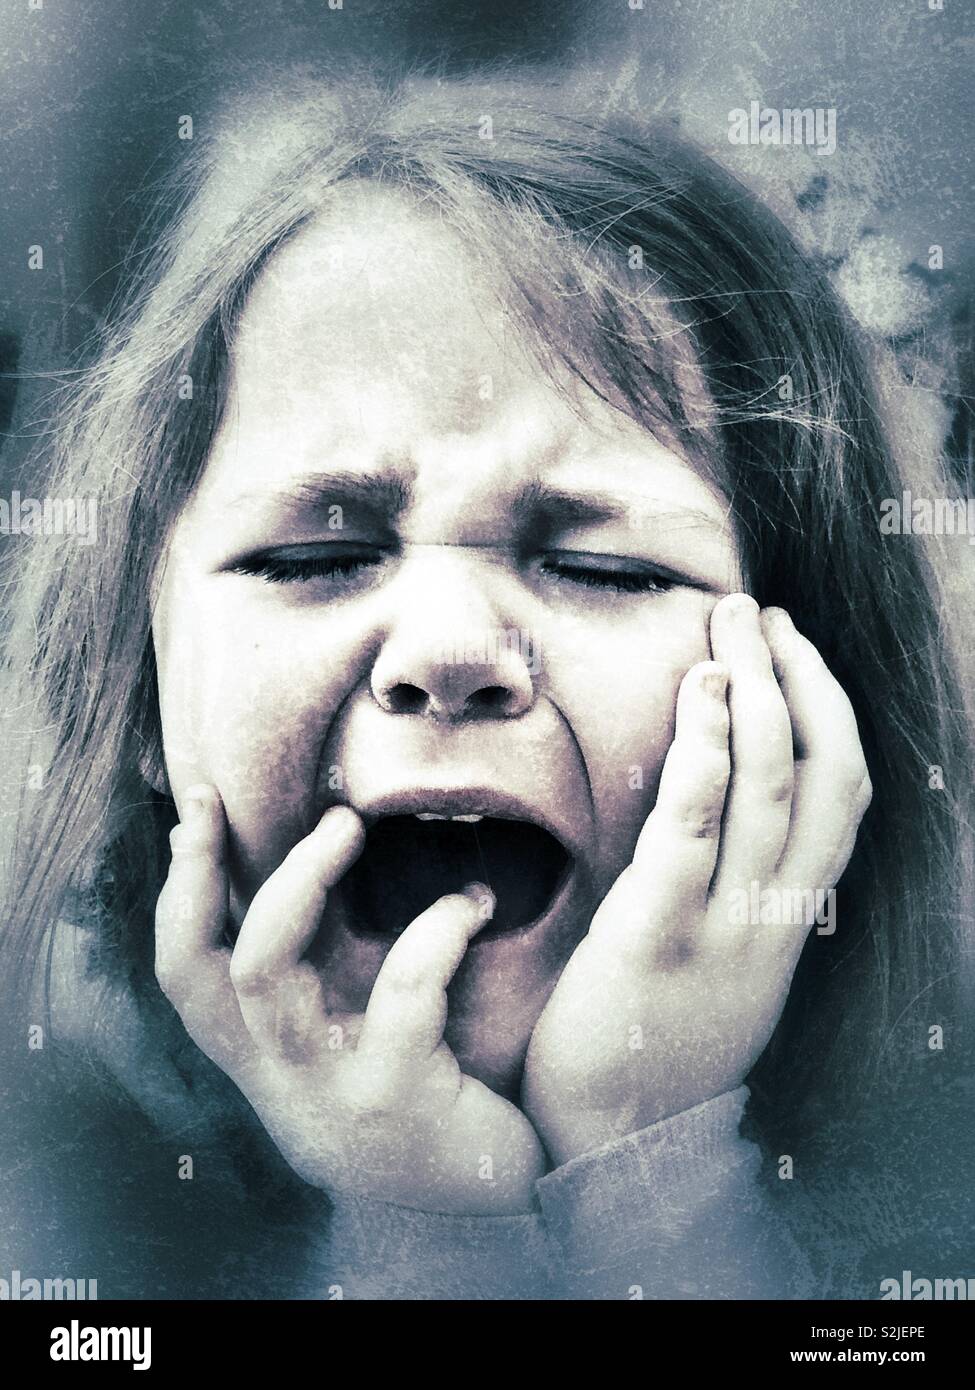 Closeup creative portrait of screaming and crying young girl Stock Photo